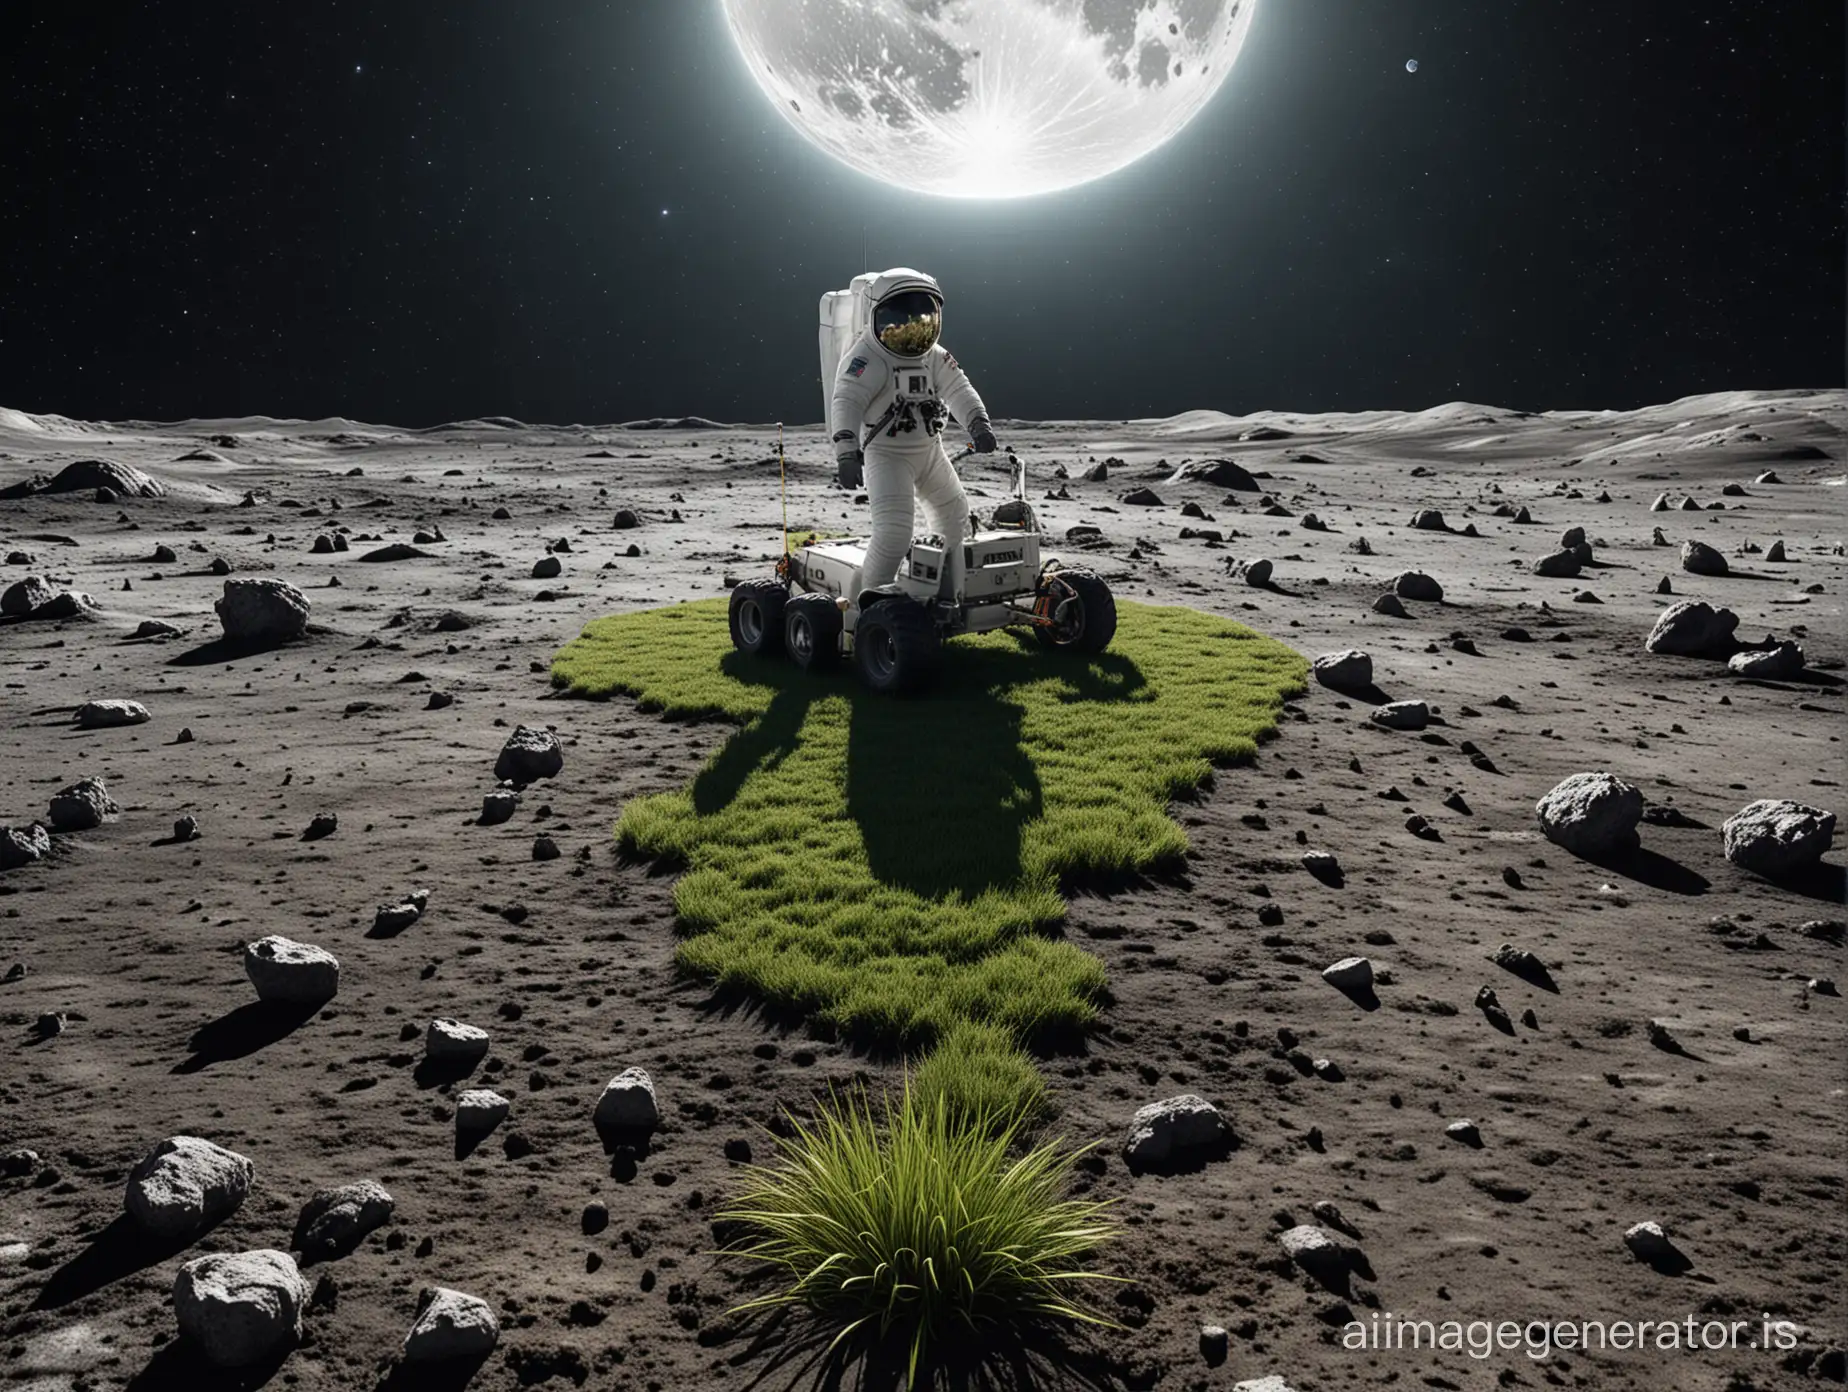 Astronaut-Mowing-Grass-on-Moon-Surface-with-Earth-View